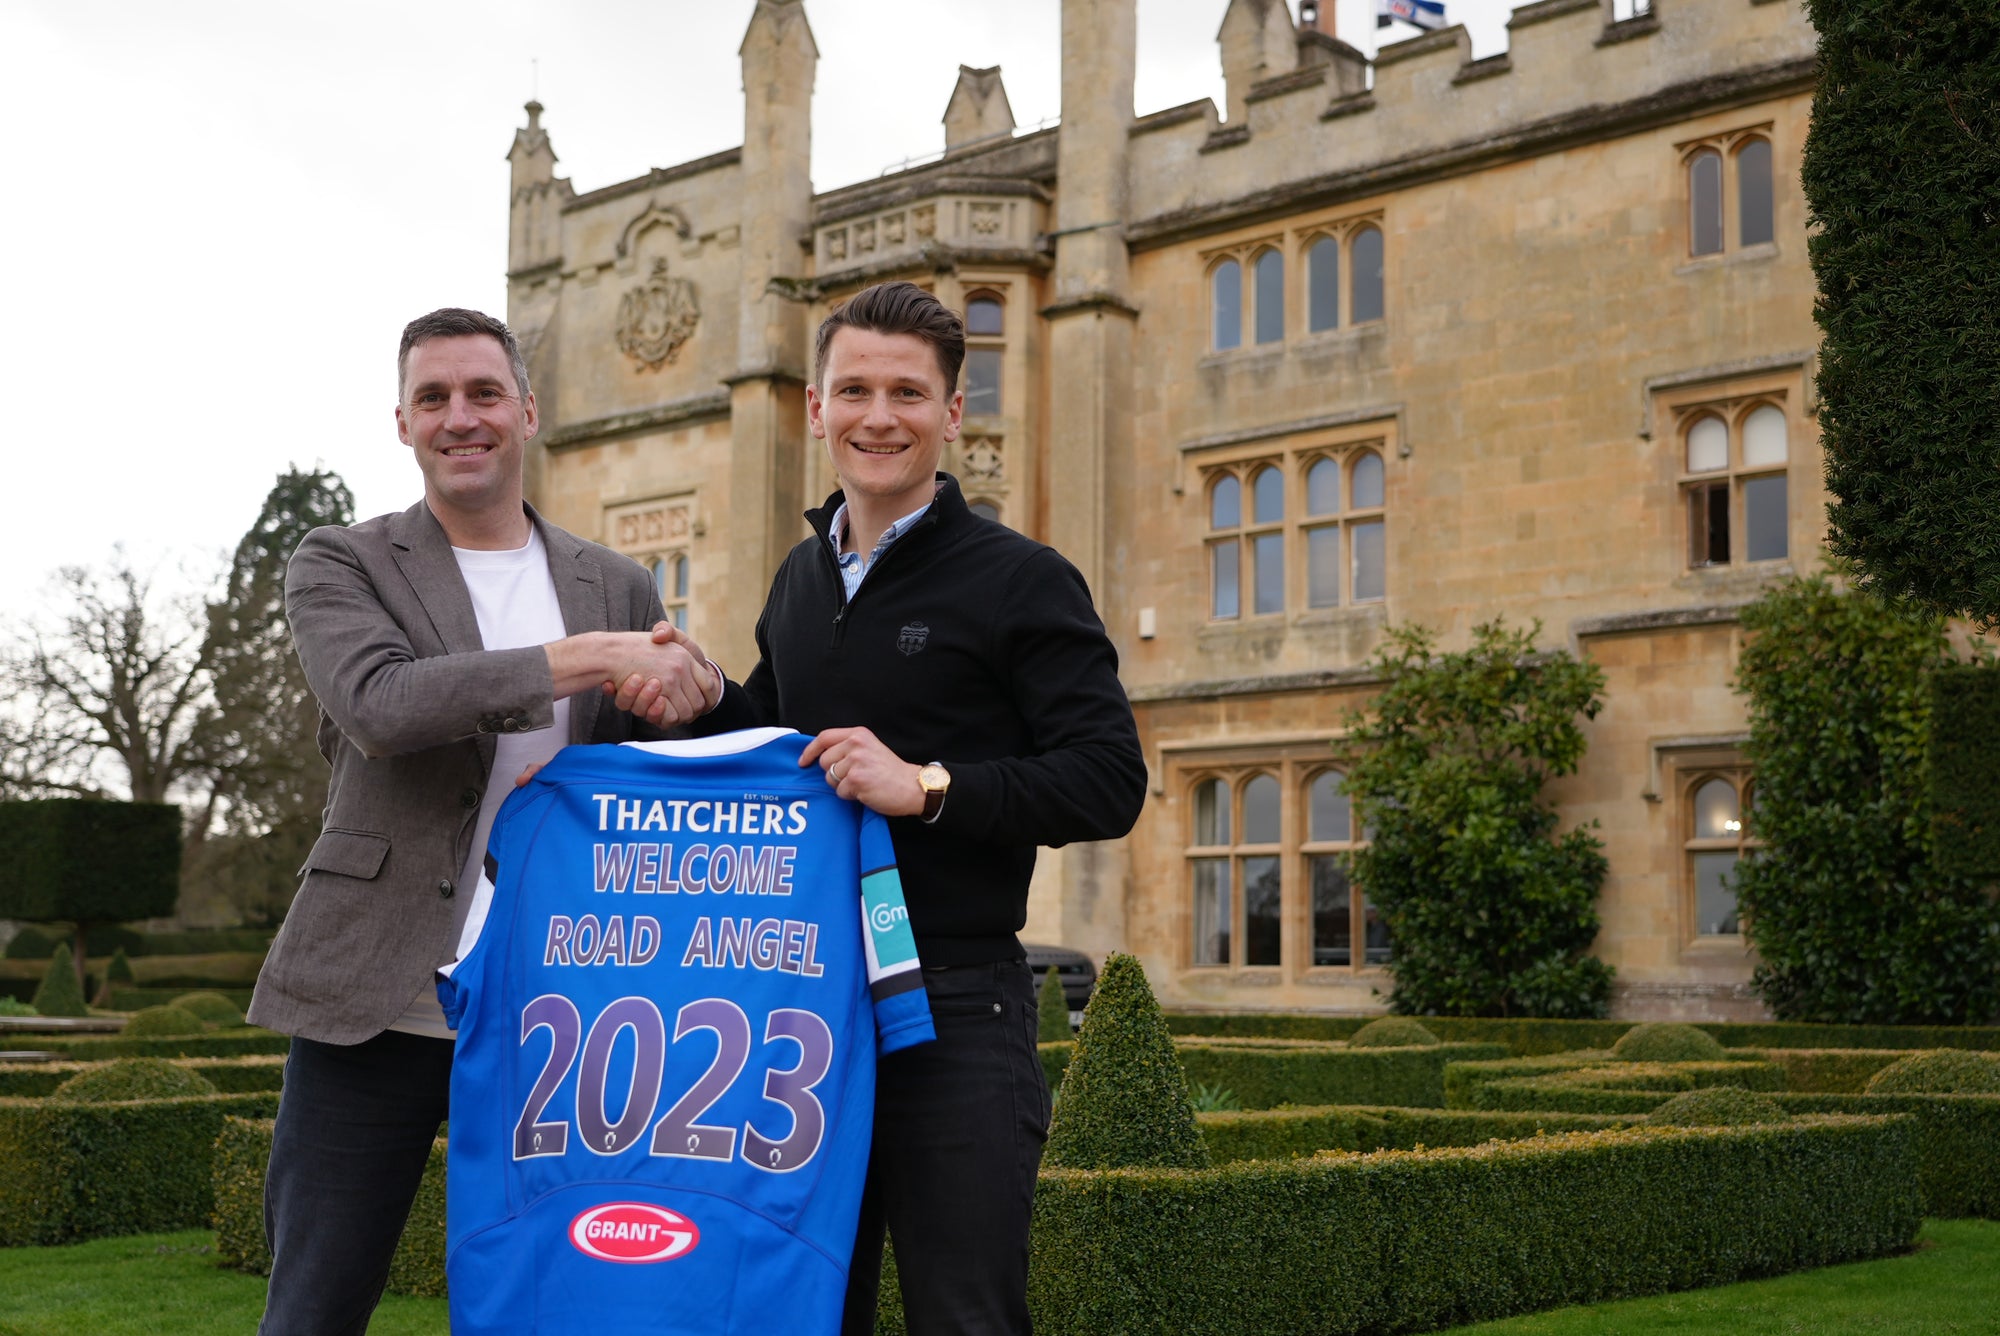 Road Angel becomes official road safety partner of Bath Rugby